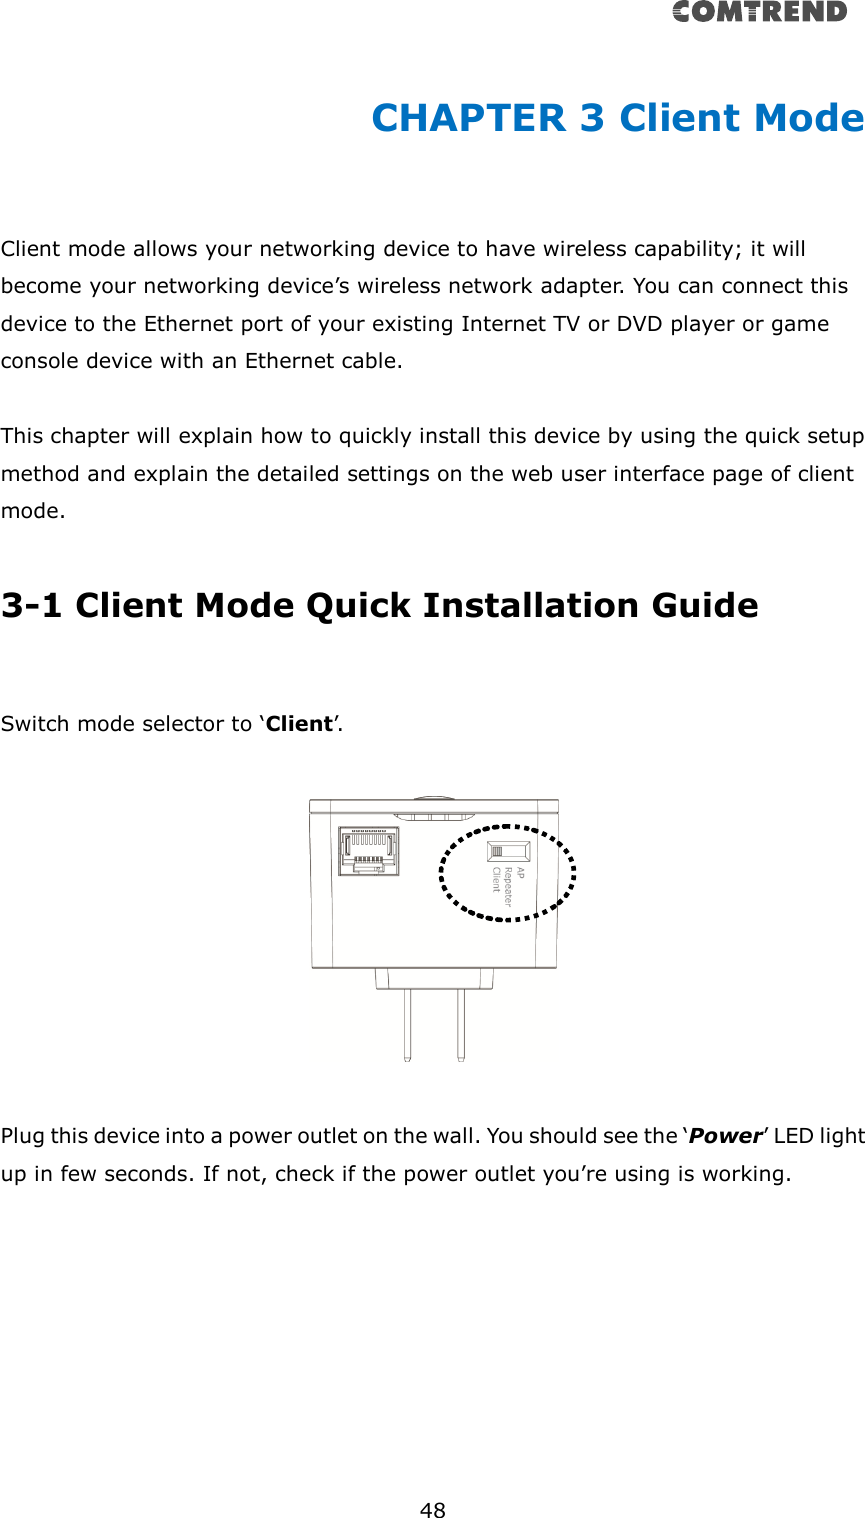       48  CHAPTER 3 Client Mode  Client mode allows your networking device to have wireless capability; it will become your networking device’s wireless network adapter. You can connect this device to the Ethernet port of your existing Internet TV or DVD player or game console device with an Ethernet cable.  This chapter will explain how to quickly install this device by using the quick setup method and explain the detailed settings on the web user interface page of client mode.    3-1 Client Mode Quick Installation Guide  Switch mode selector to ‘Client’.     Plug this device into a power outlet on the wall. You should see the ‘Power’ LED light up in few seconds. If not, check if the power outlet you’re using is working.  